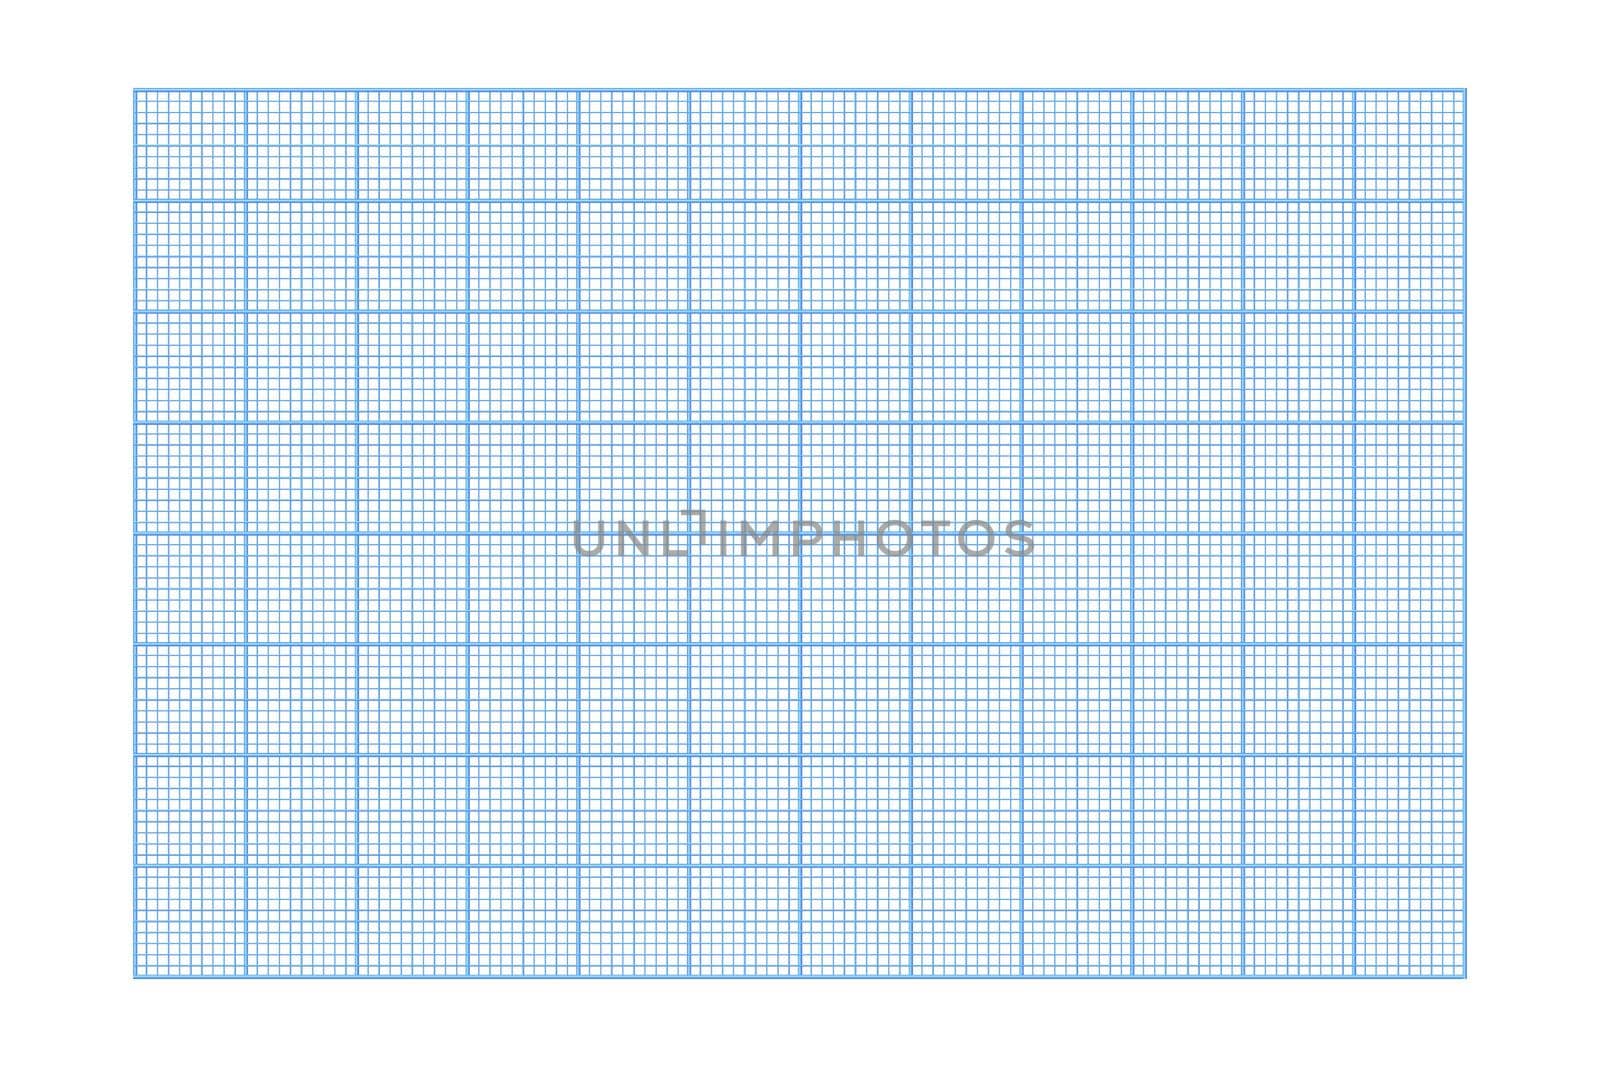 Millimeter graph paper grid. Abstract squared background. Geometric pattern for school, technical engineering line scale measurement. Lined blank for education isolated on transparent background. by allaku